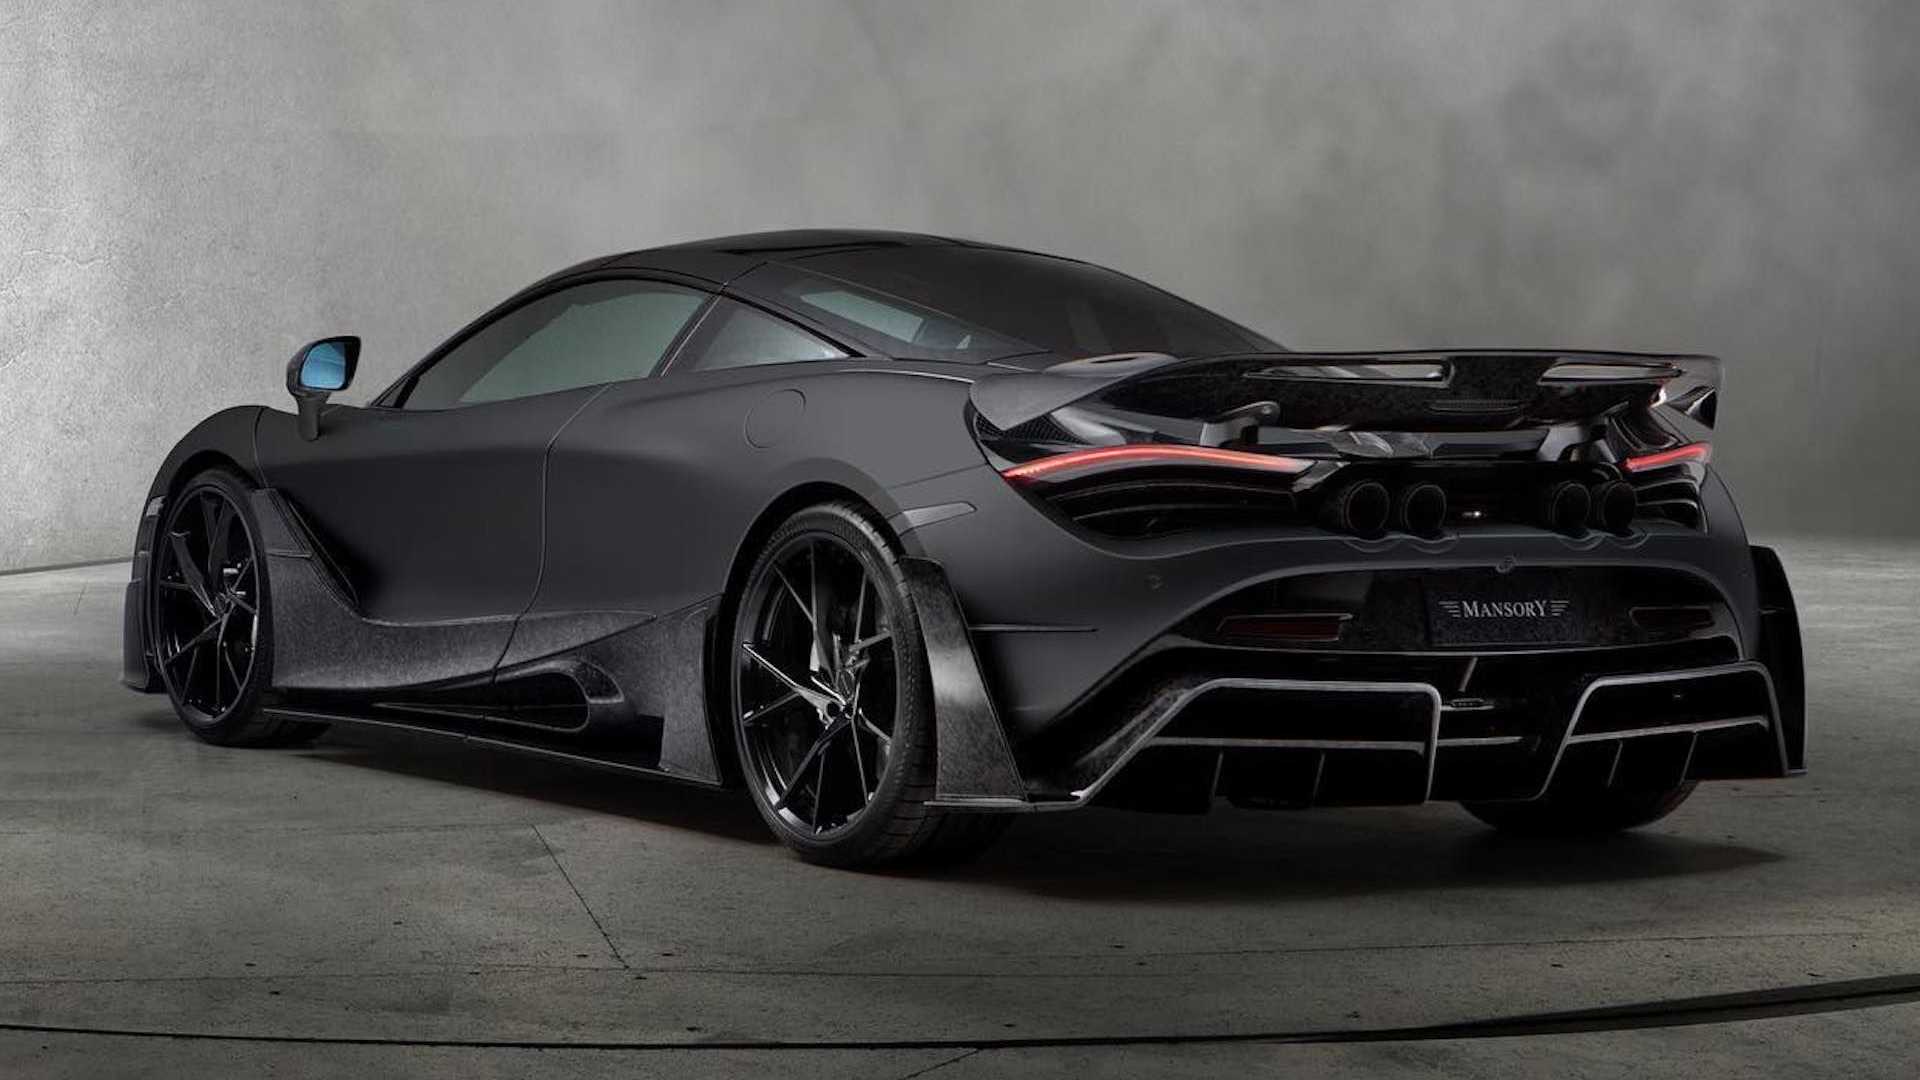 All black! Mansory's McLaren 720S and its almost 800 hp